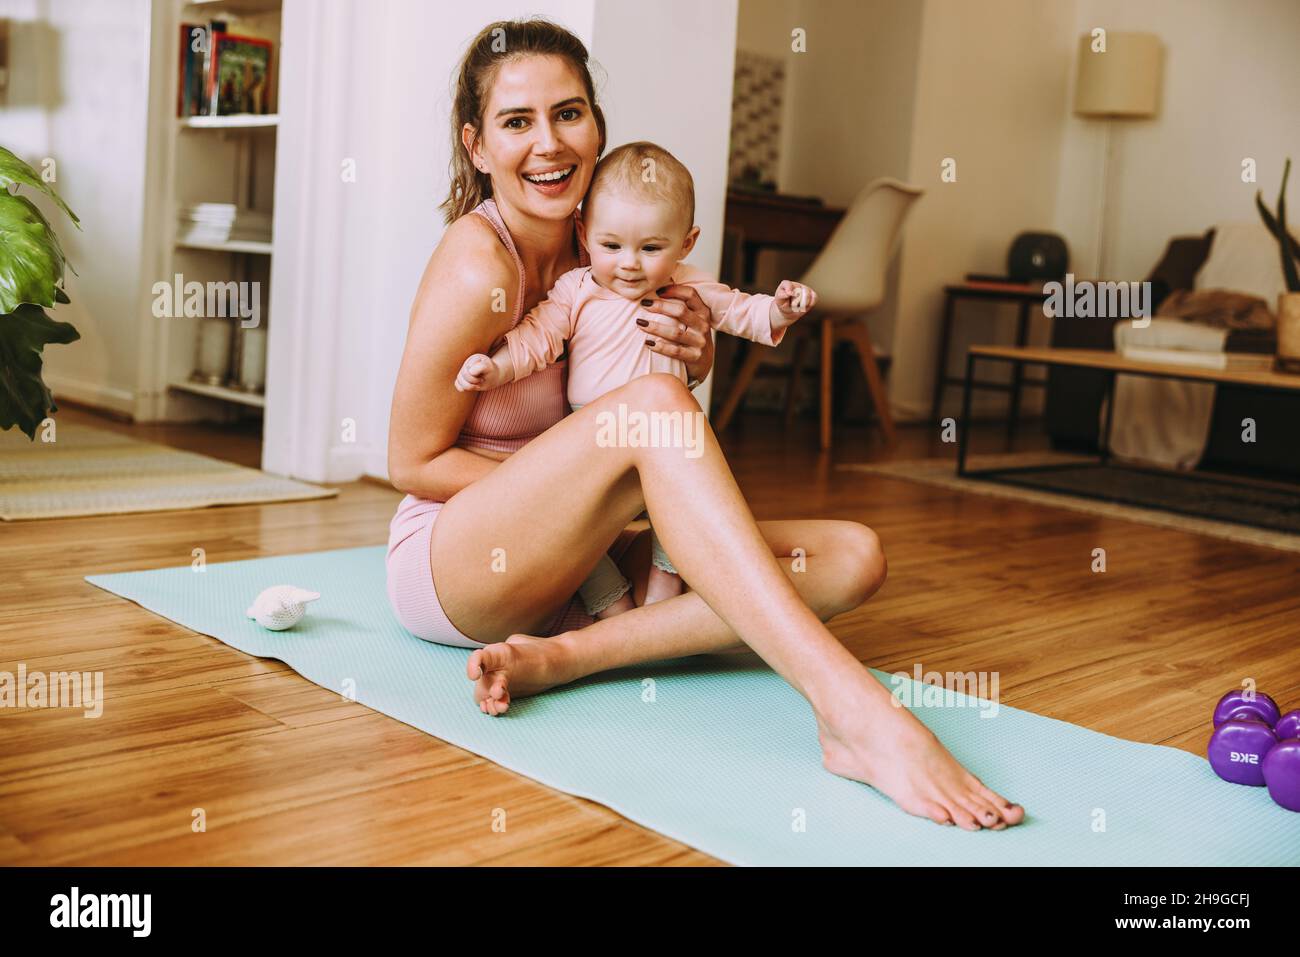 Smiling mom holding her baby while sitting on an exercise mat. Happy young mom working out with her little baby at home. New mom bonding with her baby Stock Photo